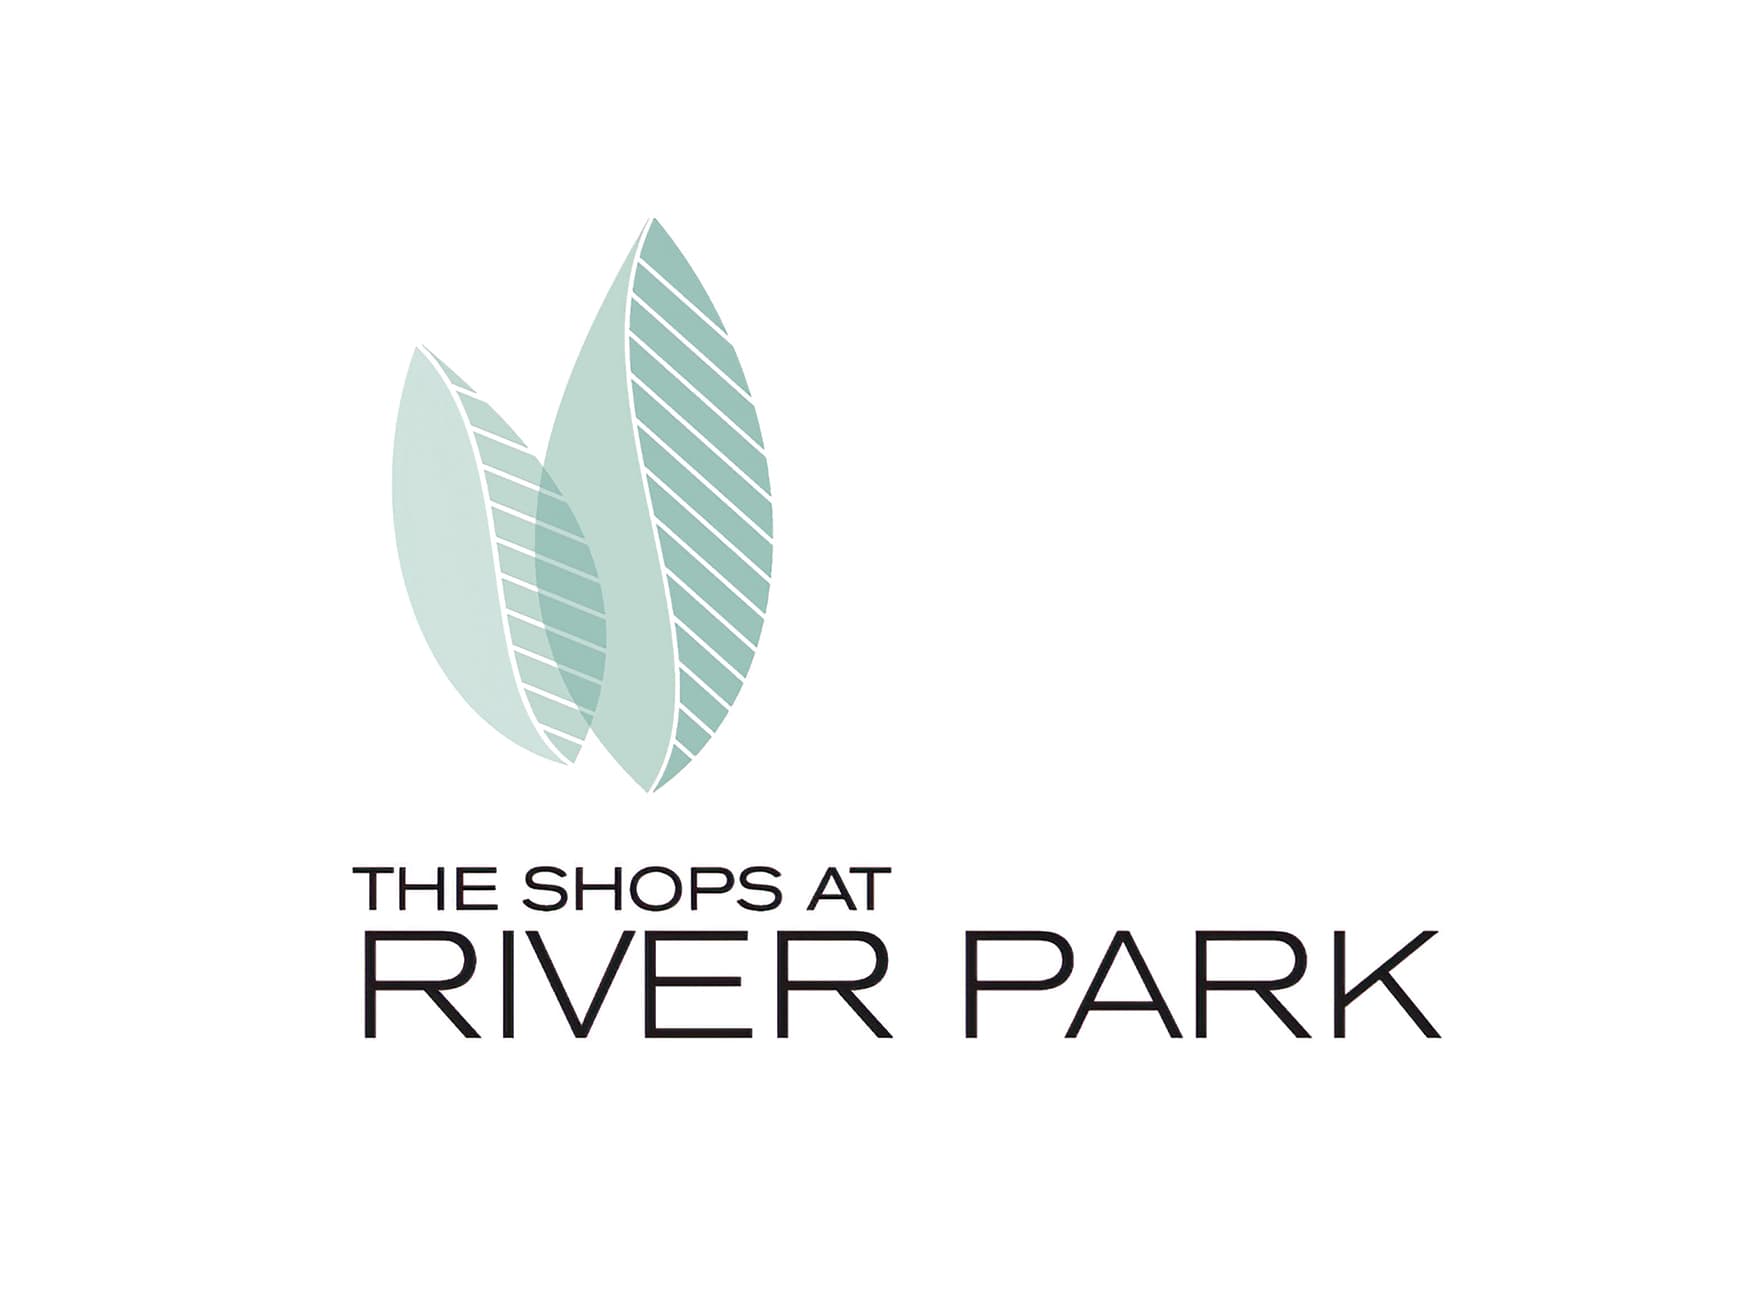 The Shops at River Park, a retail shopping center in Fresno, California. RSM Design prepared environmental graphic design services as well as wayfinding and placemaking elements. Retail Branding and Identity Design.